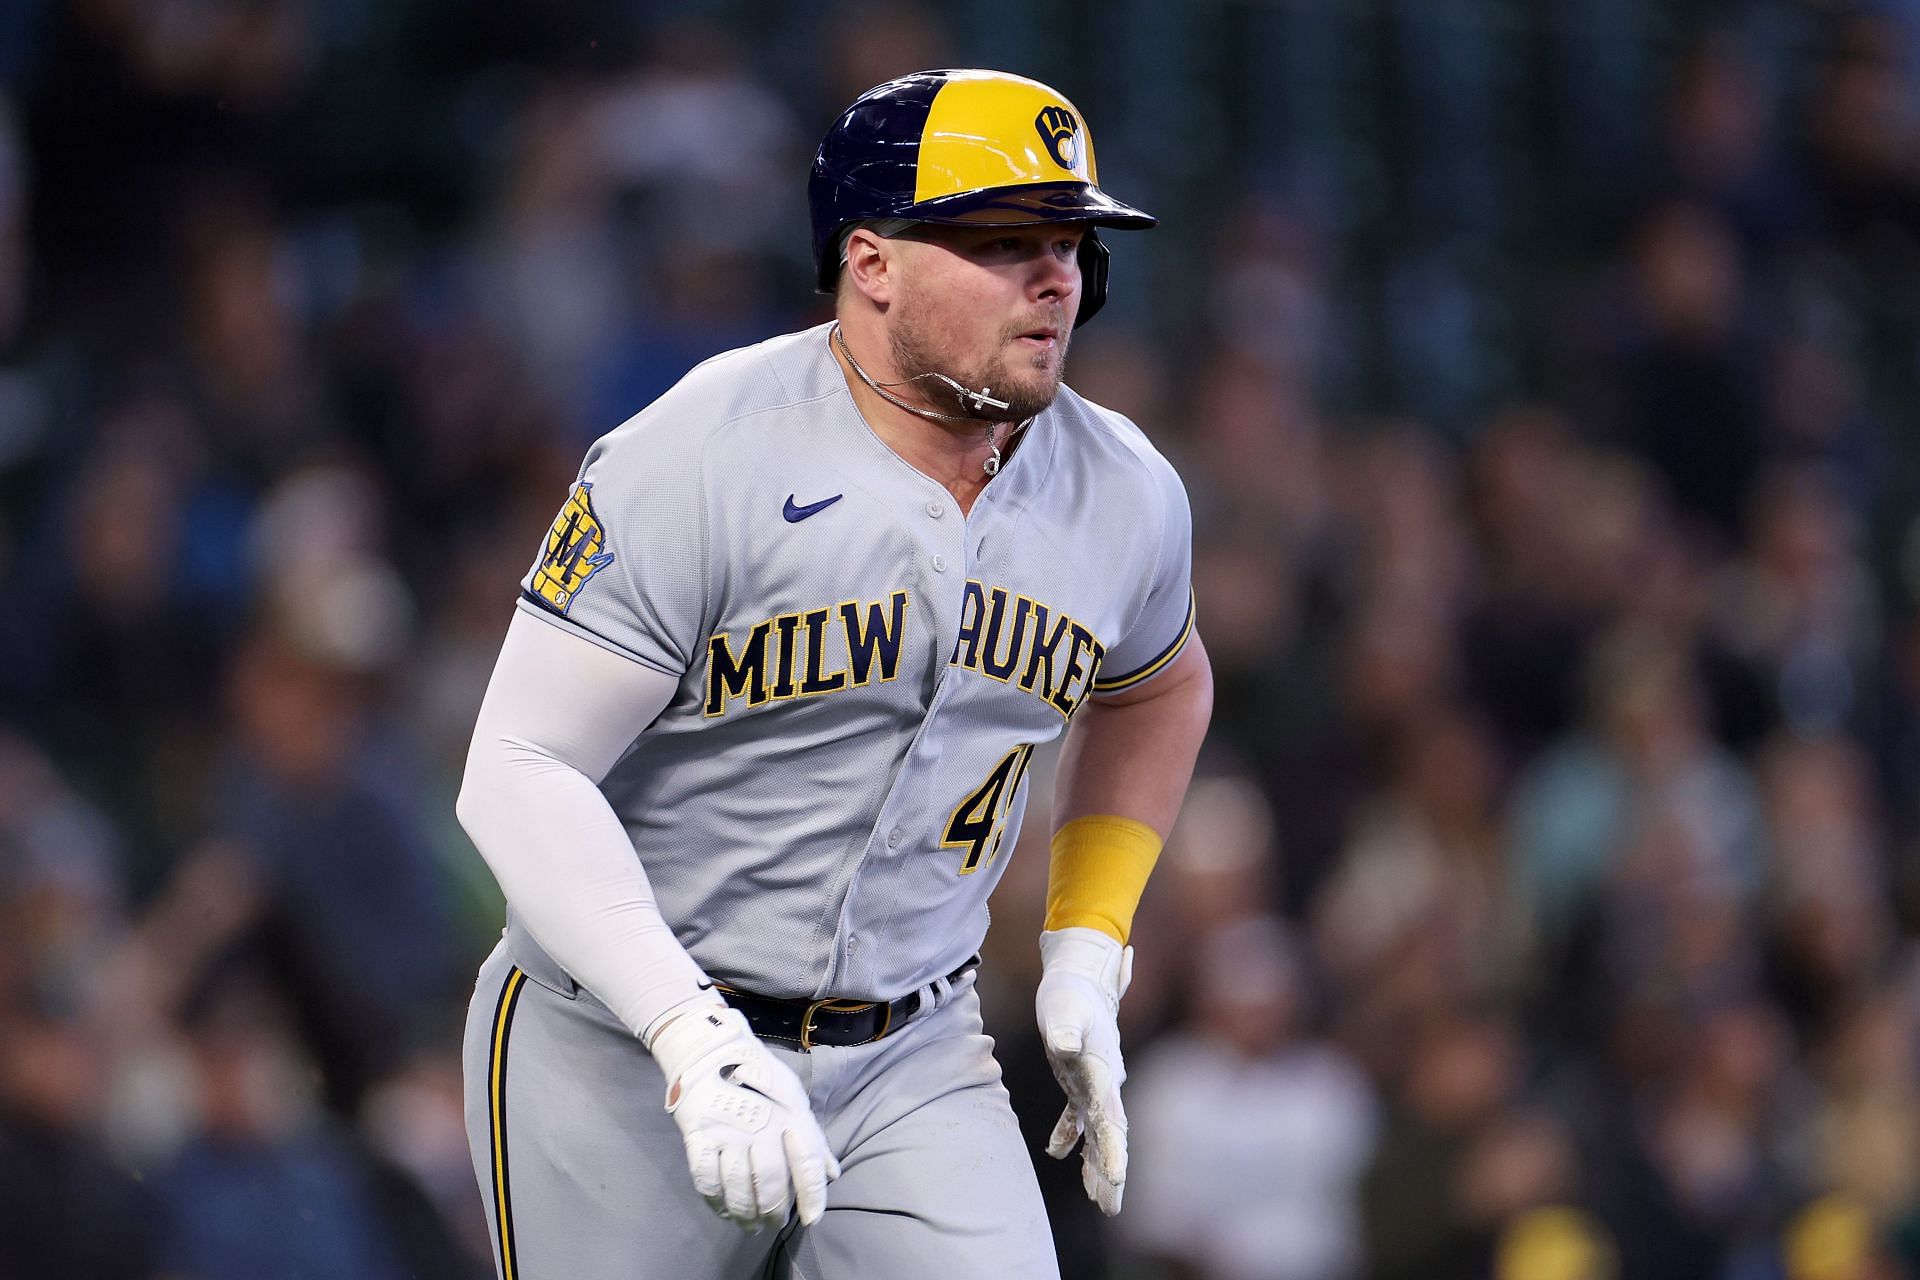 Luke Voit of the Milwaukee Brewers runs to first base.